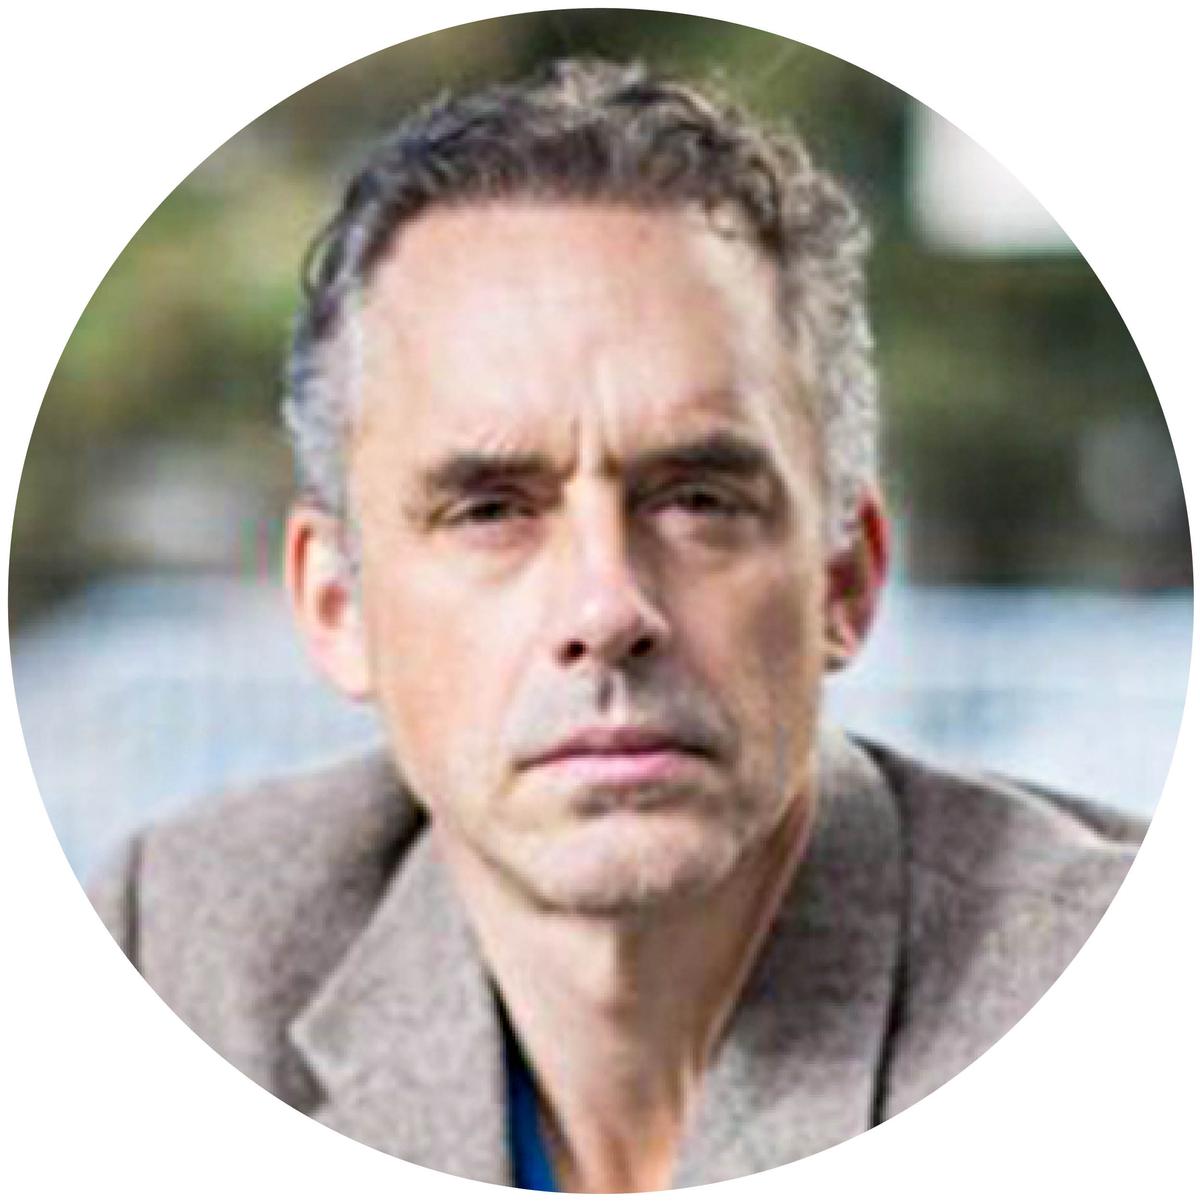 Jordan Peterson, an expert on communism and its influence on the West. (Courtesy of Jordan Peterson)